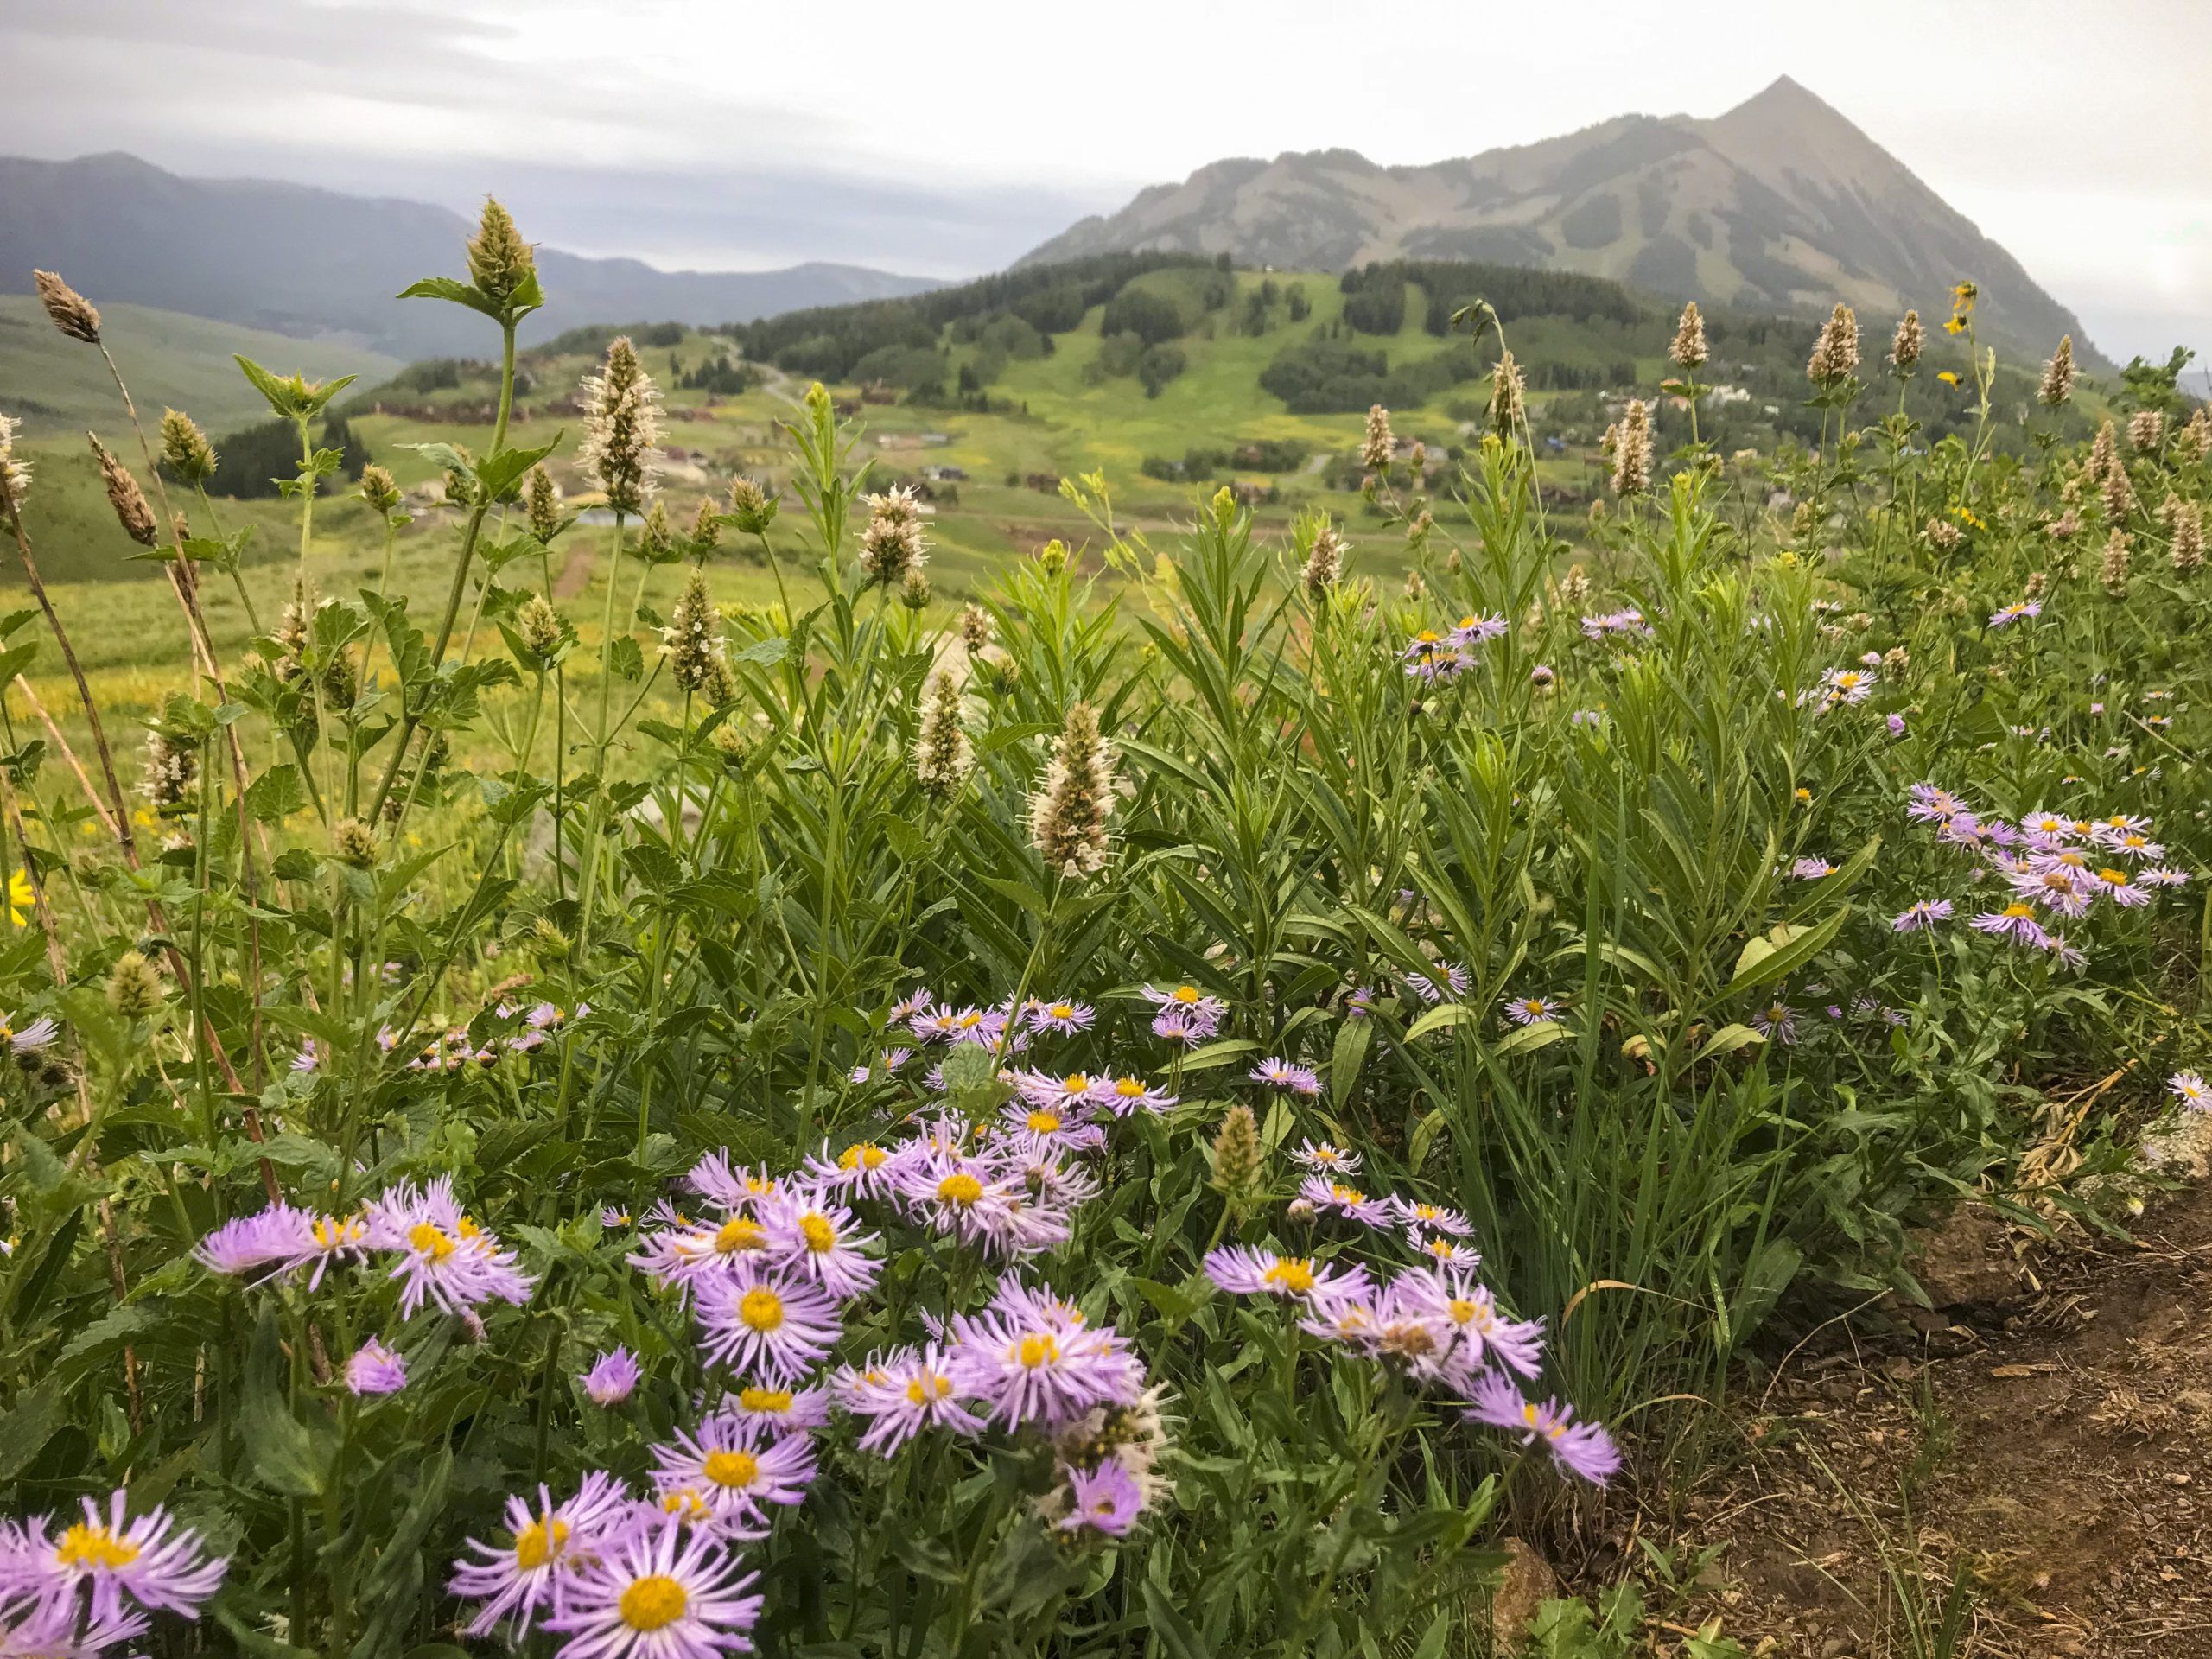 Flowers on a hillside with a mountain peak in the background. fleabane, snodgrass, crested butte, landscape, wildflowers, summer.